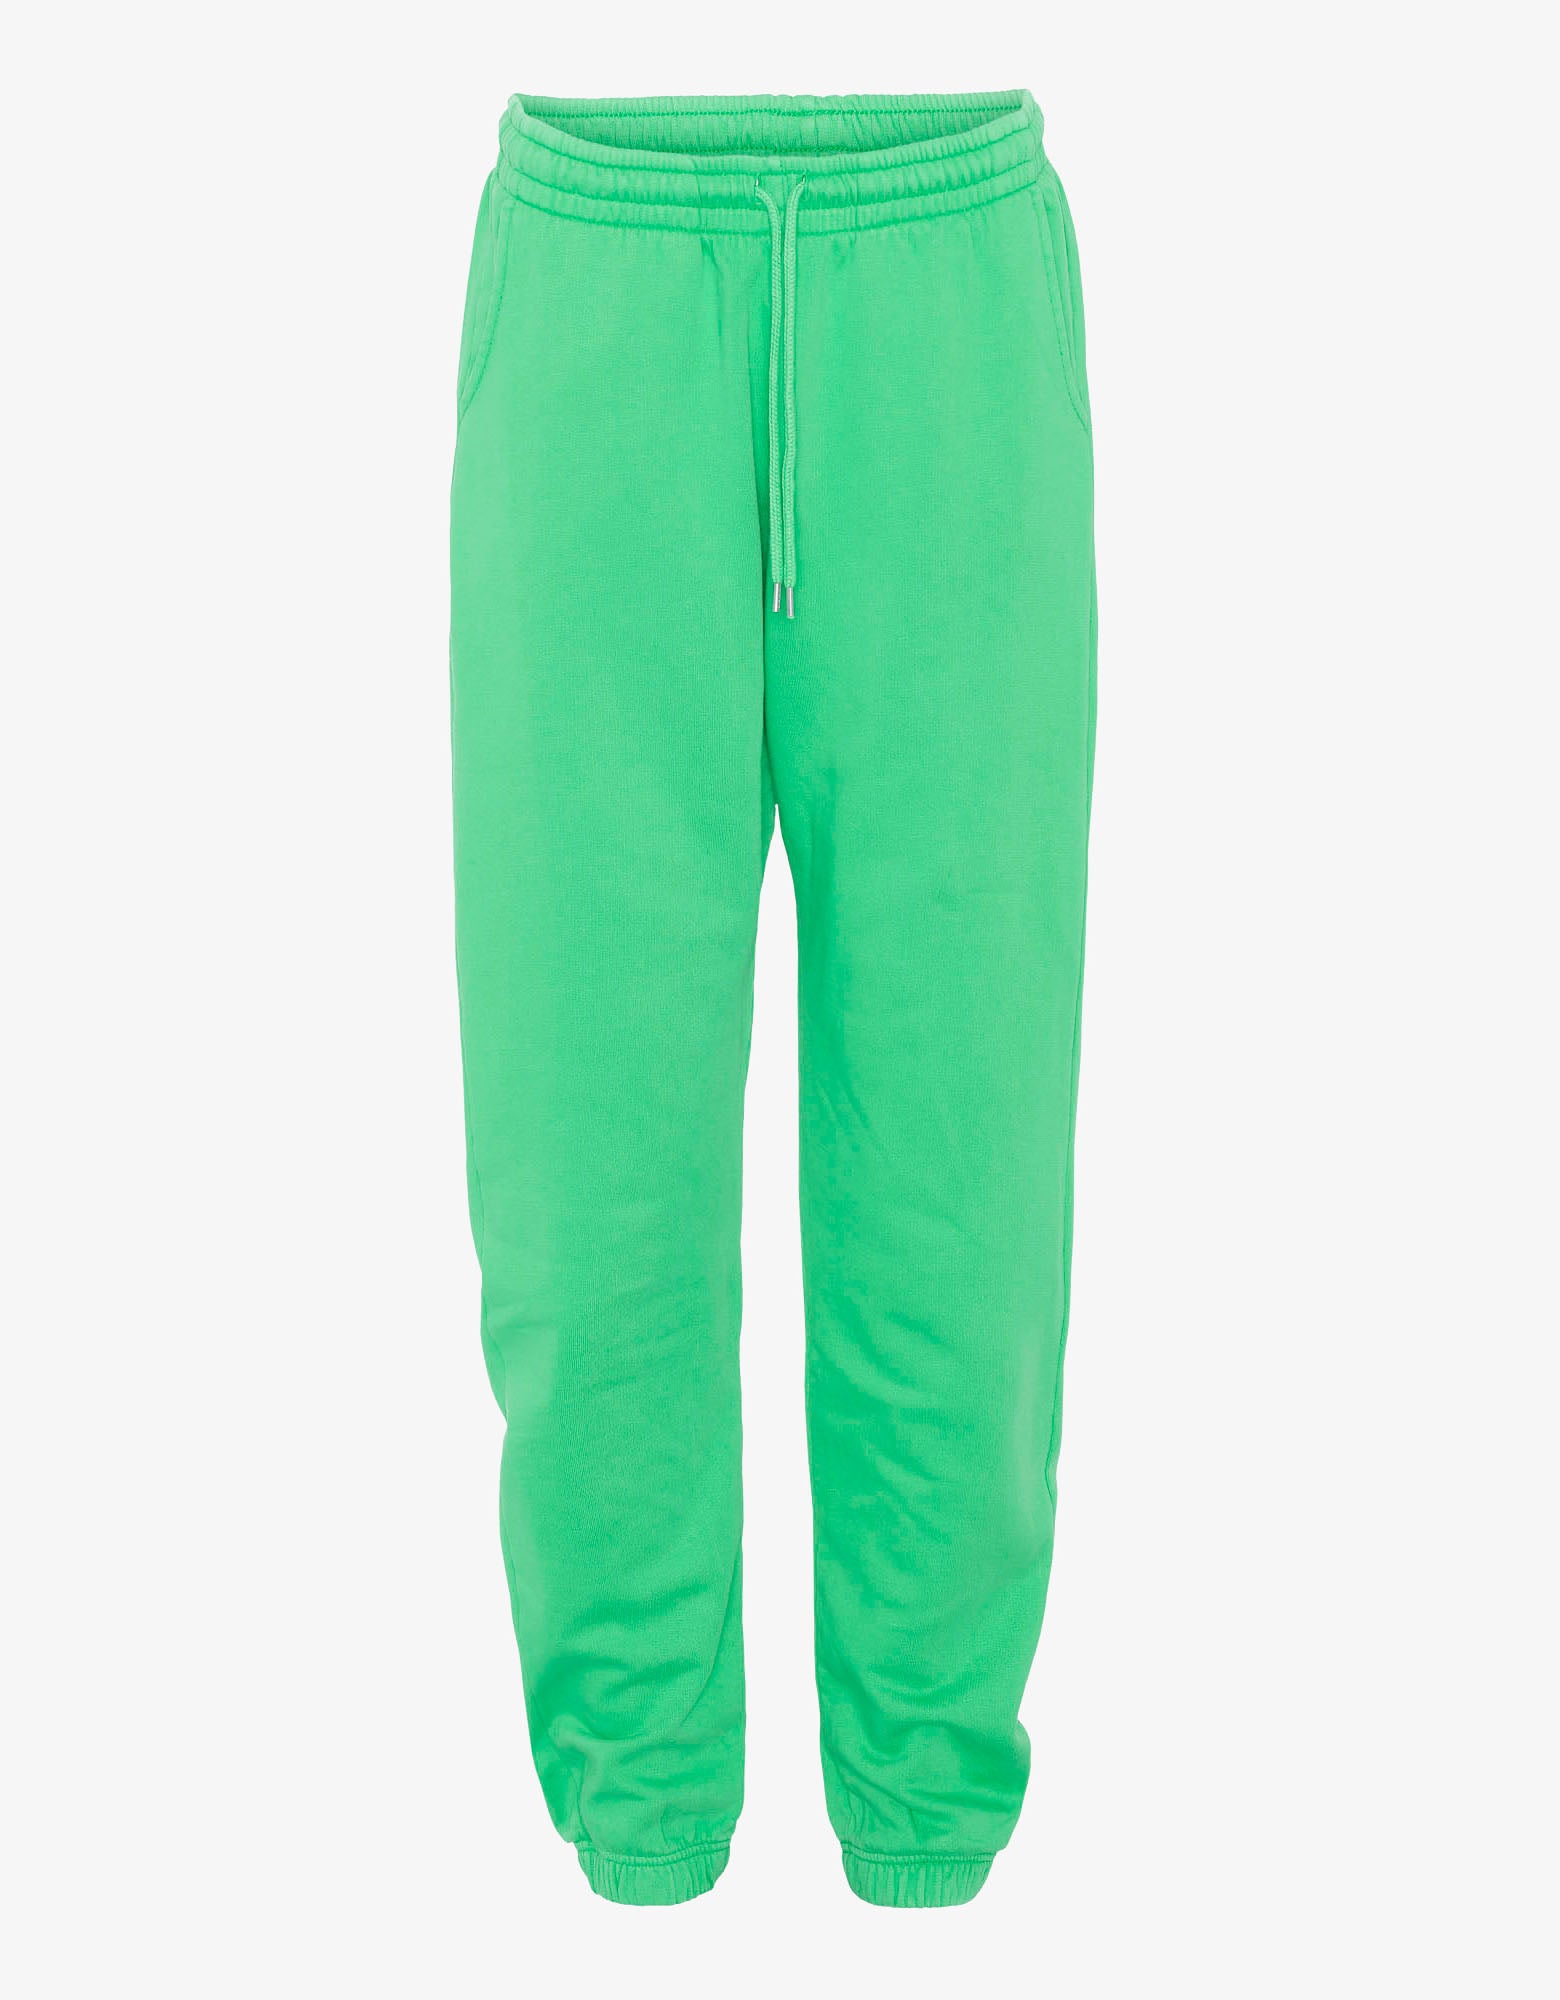 Sundry Women's Size 1 Small Sweatpants in Pigment Pop Lime Green  Activewear, NWT